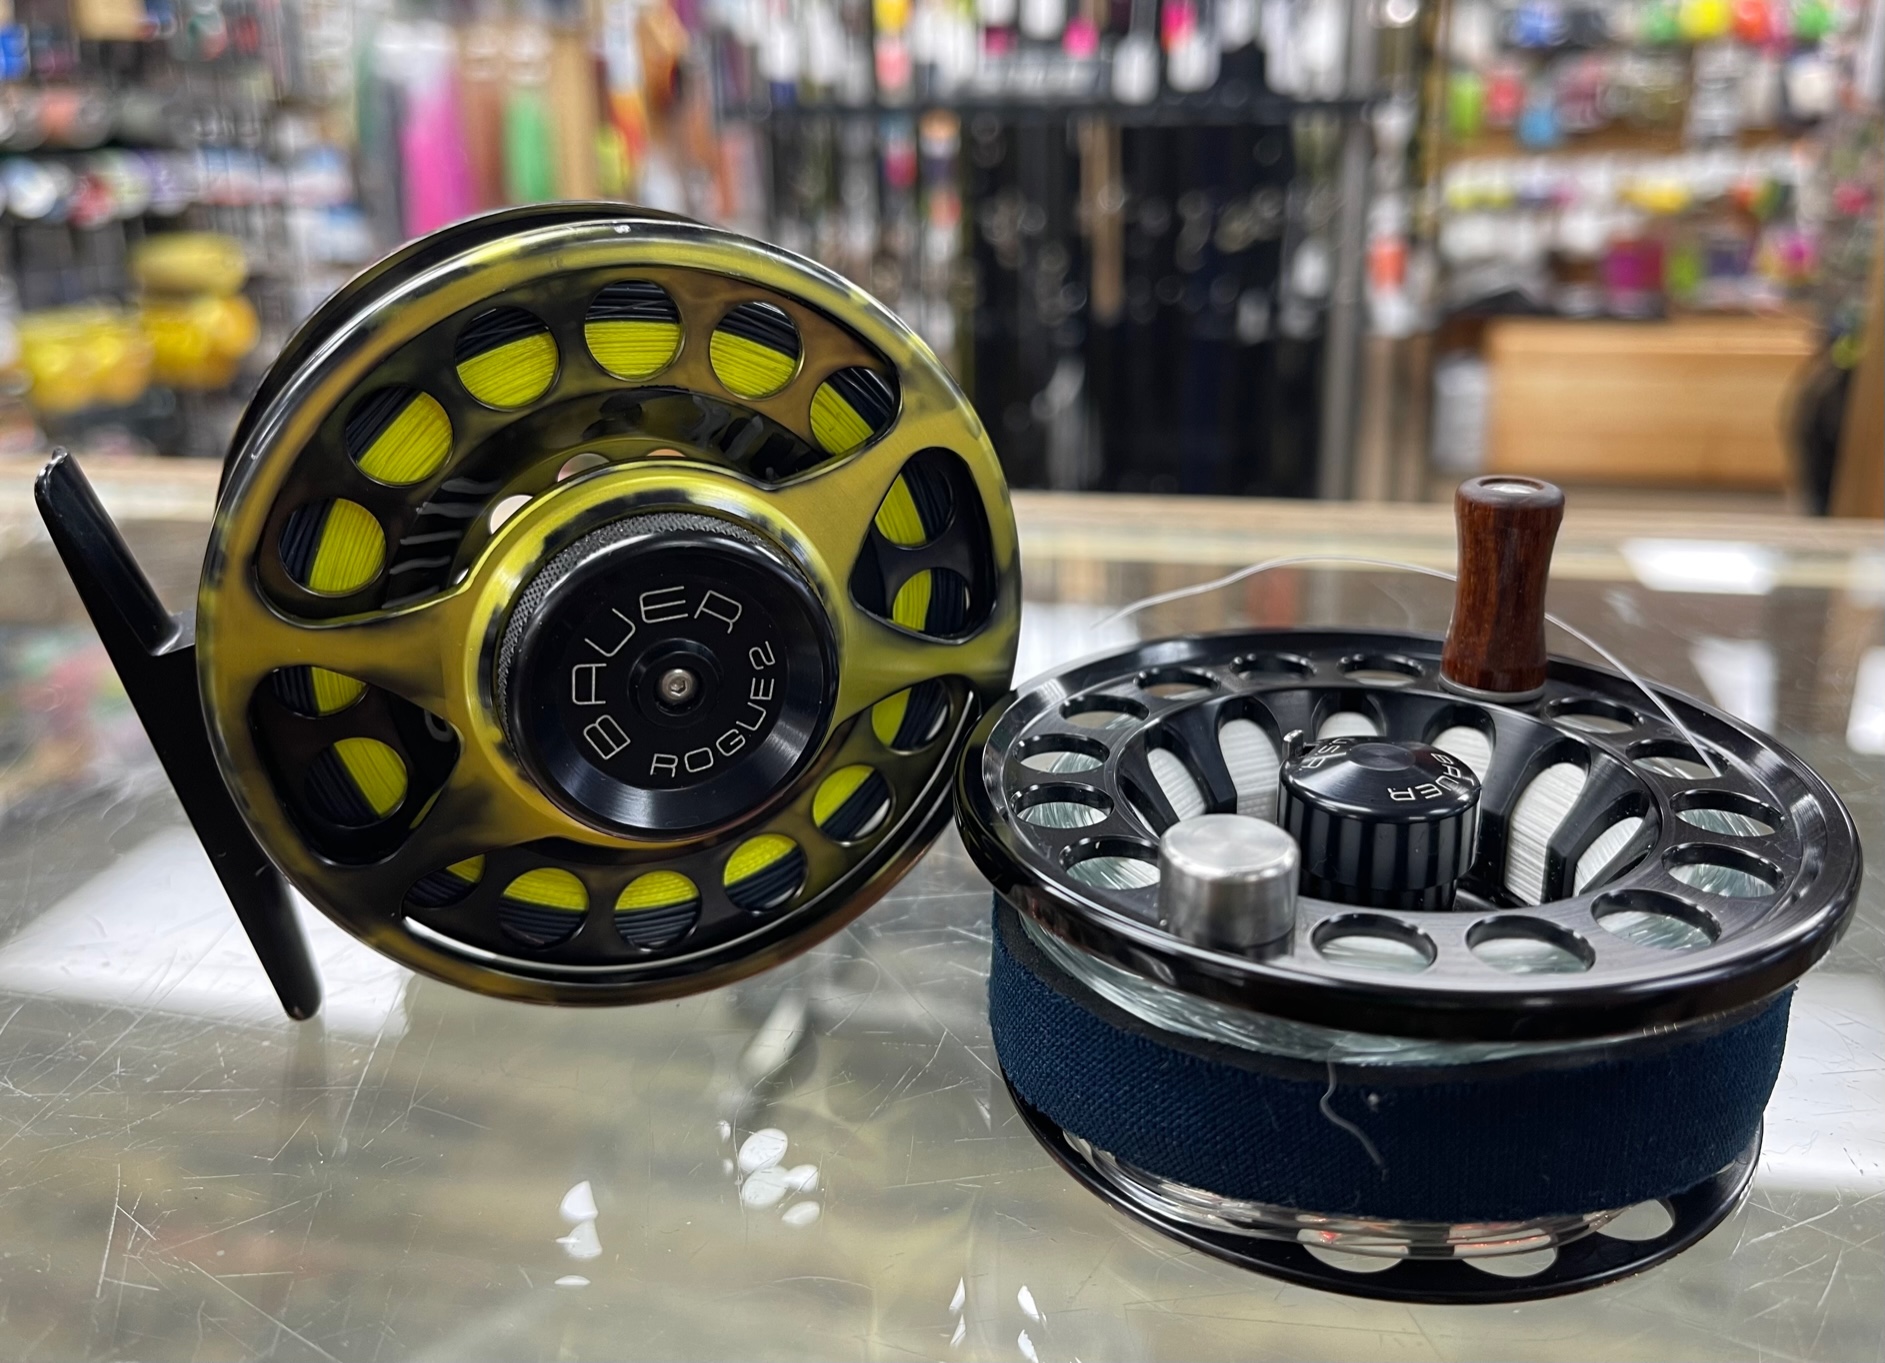 Bauer Rogue 2 (5/6) Fly Reel w/ Spare Spool - Splash Yellow - Lightly Used